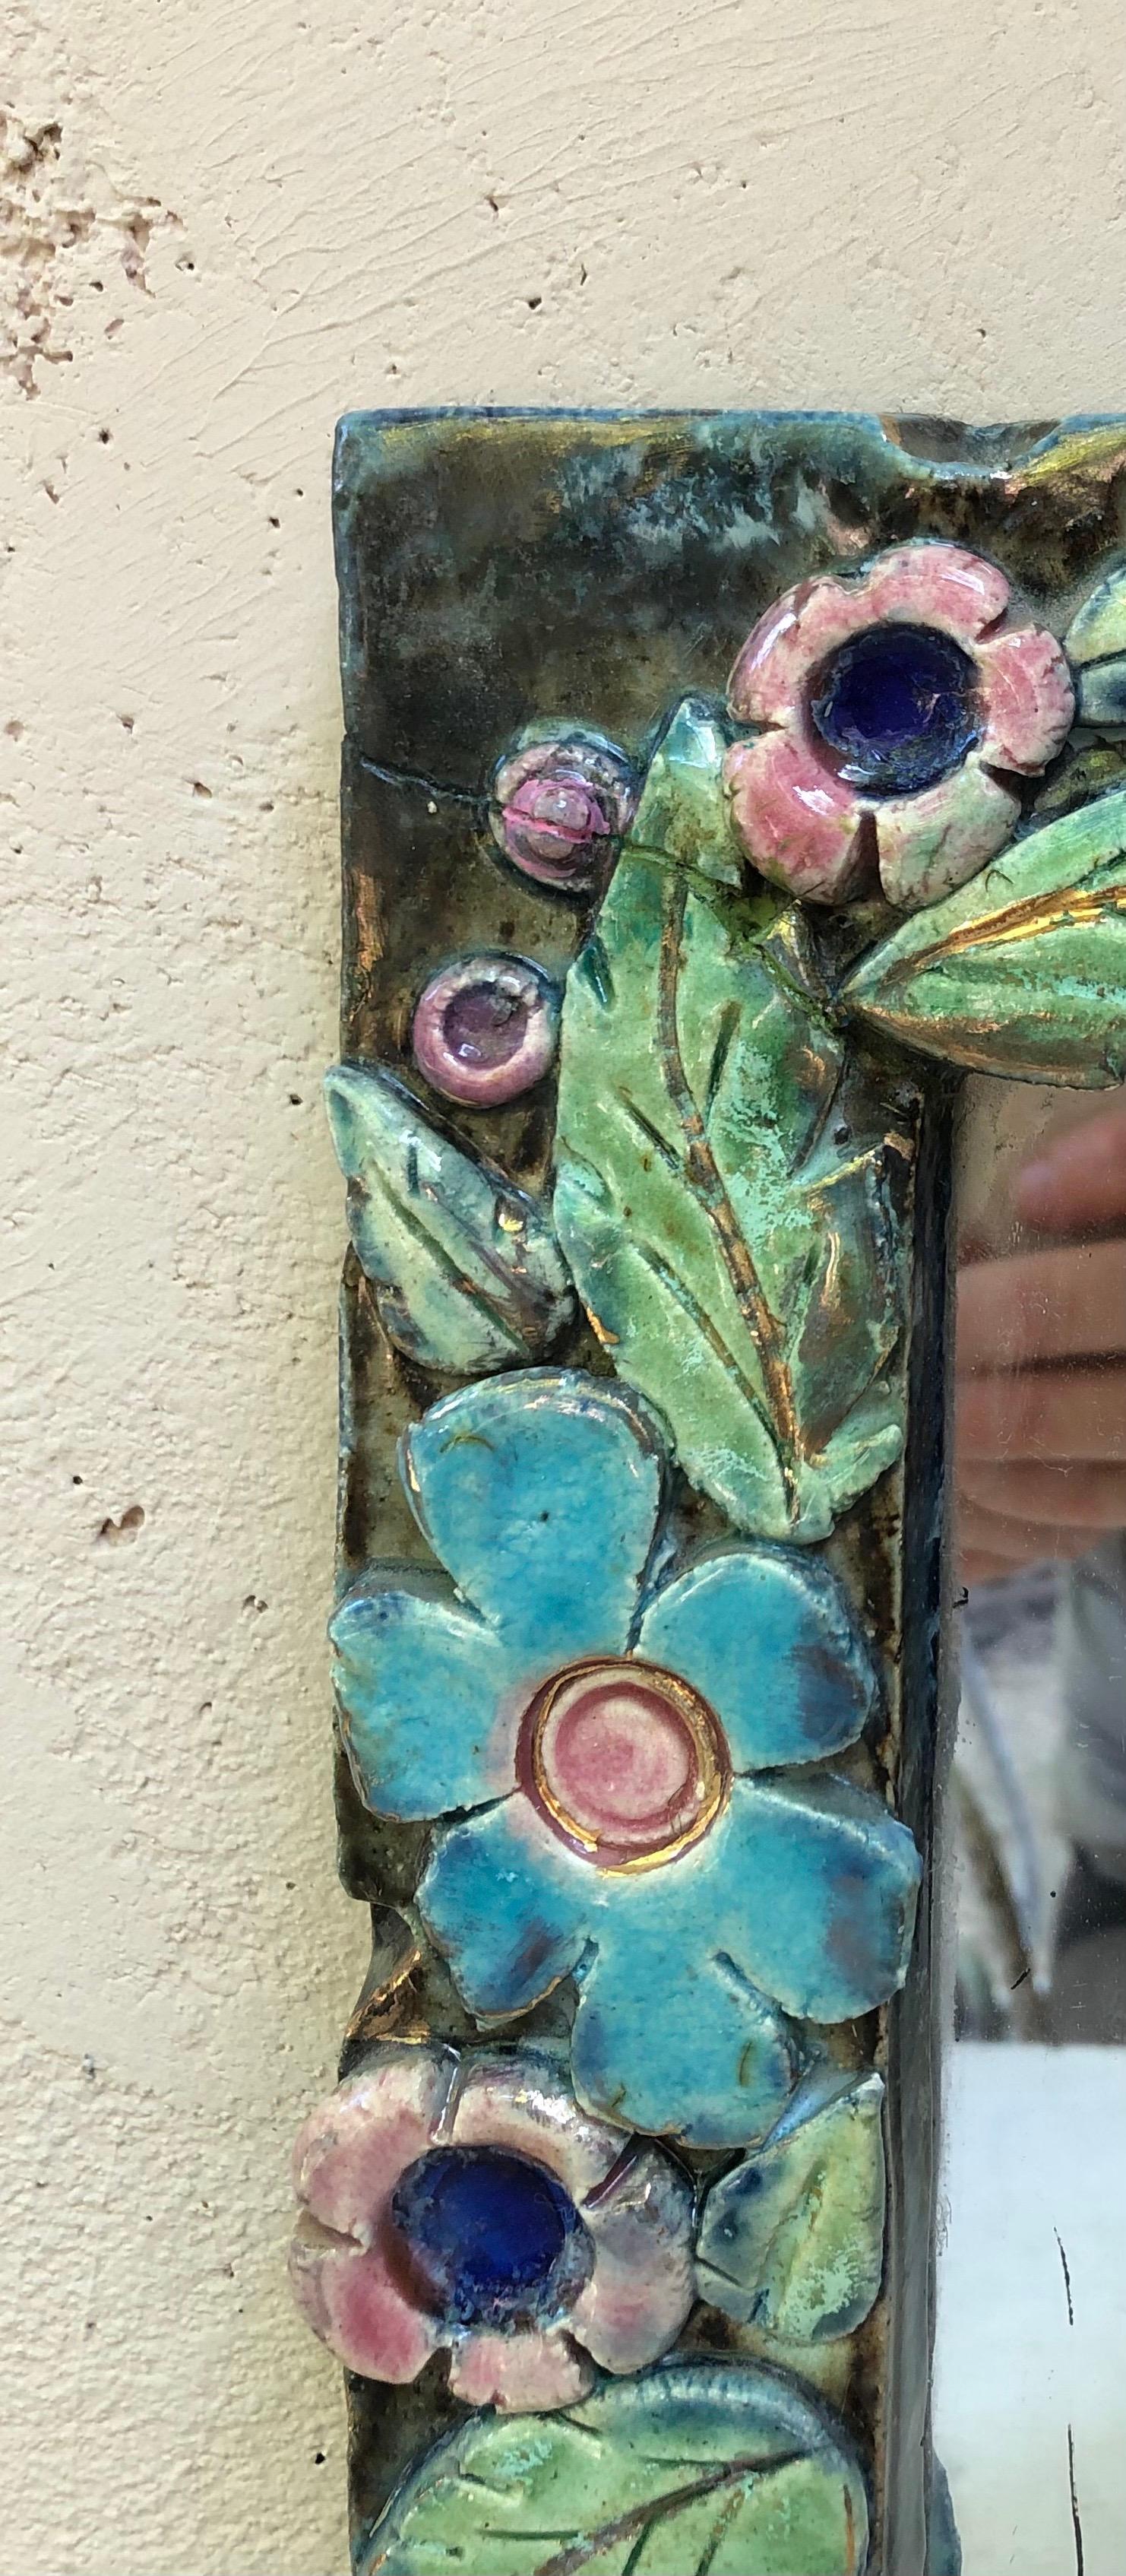 French ceramic mirror Lembo, Circa 1950.
Decorated with aqua and pink flowers with iridescence and gold highlights.